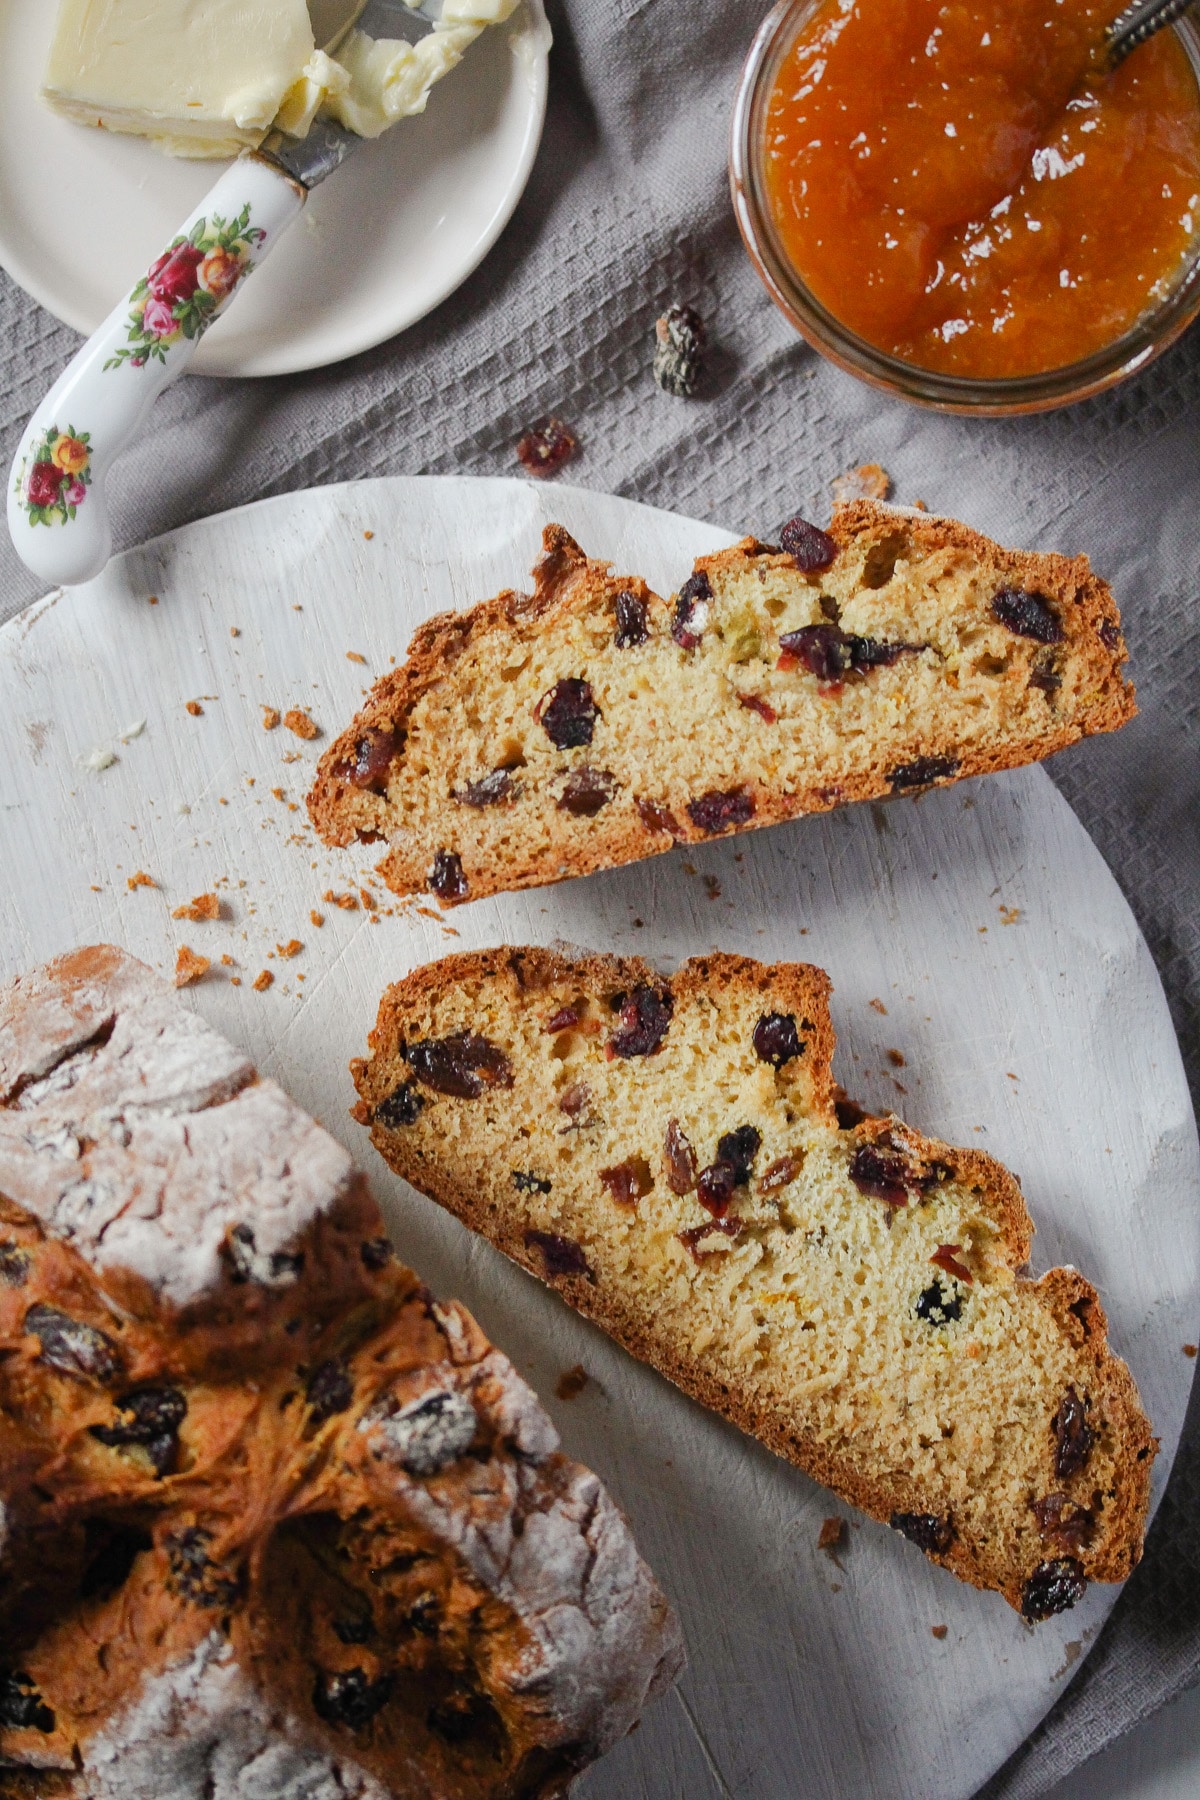 two slices of raisin bread and a jar of apricot jam